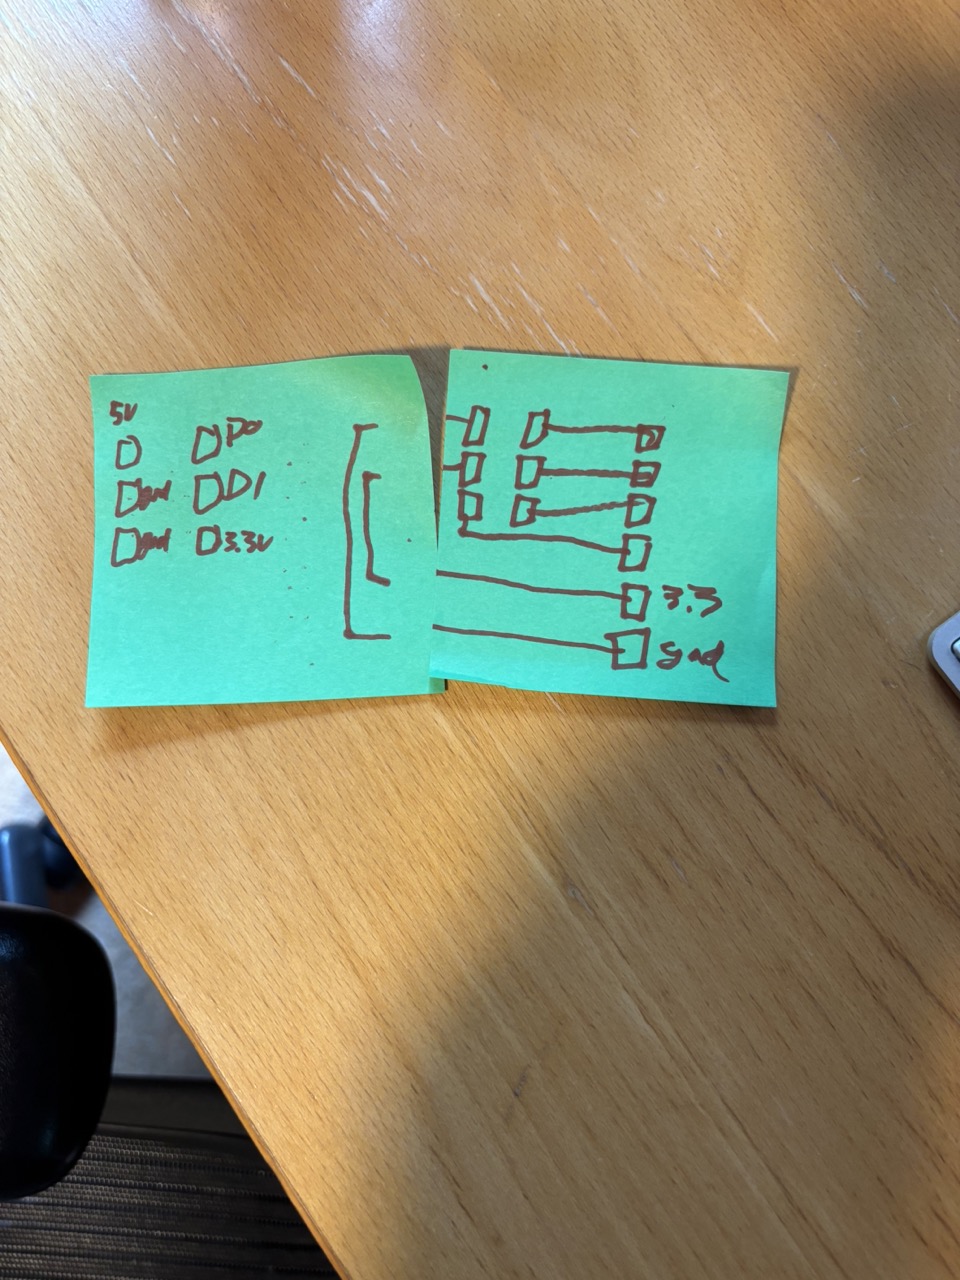 Design on Post-It Notes